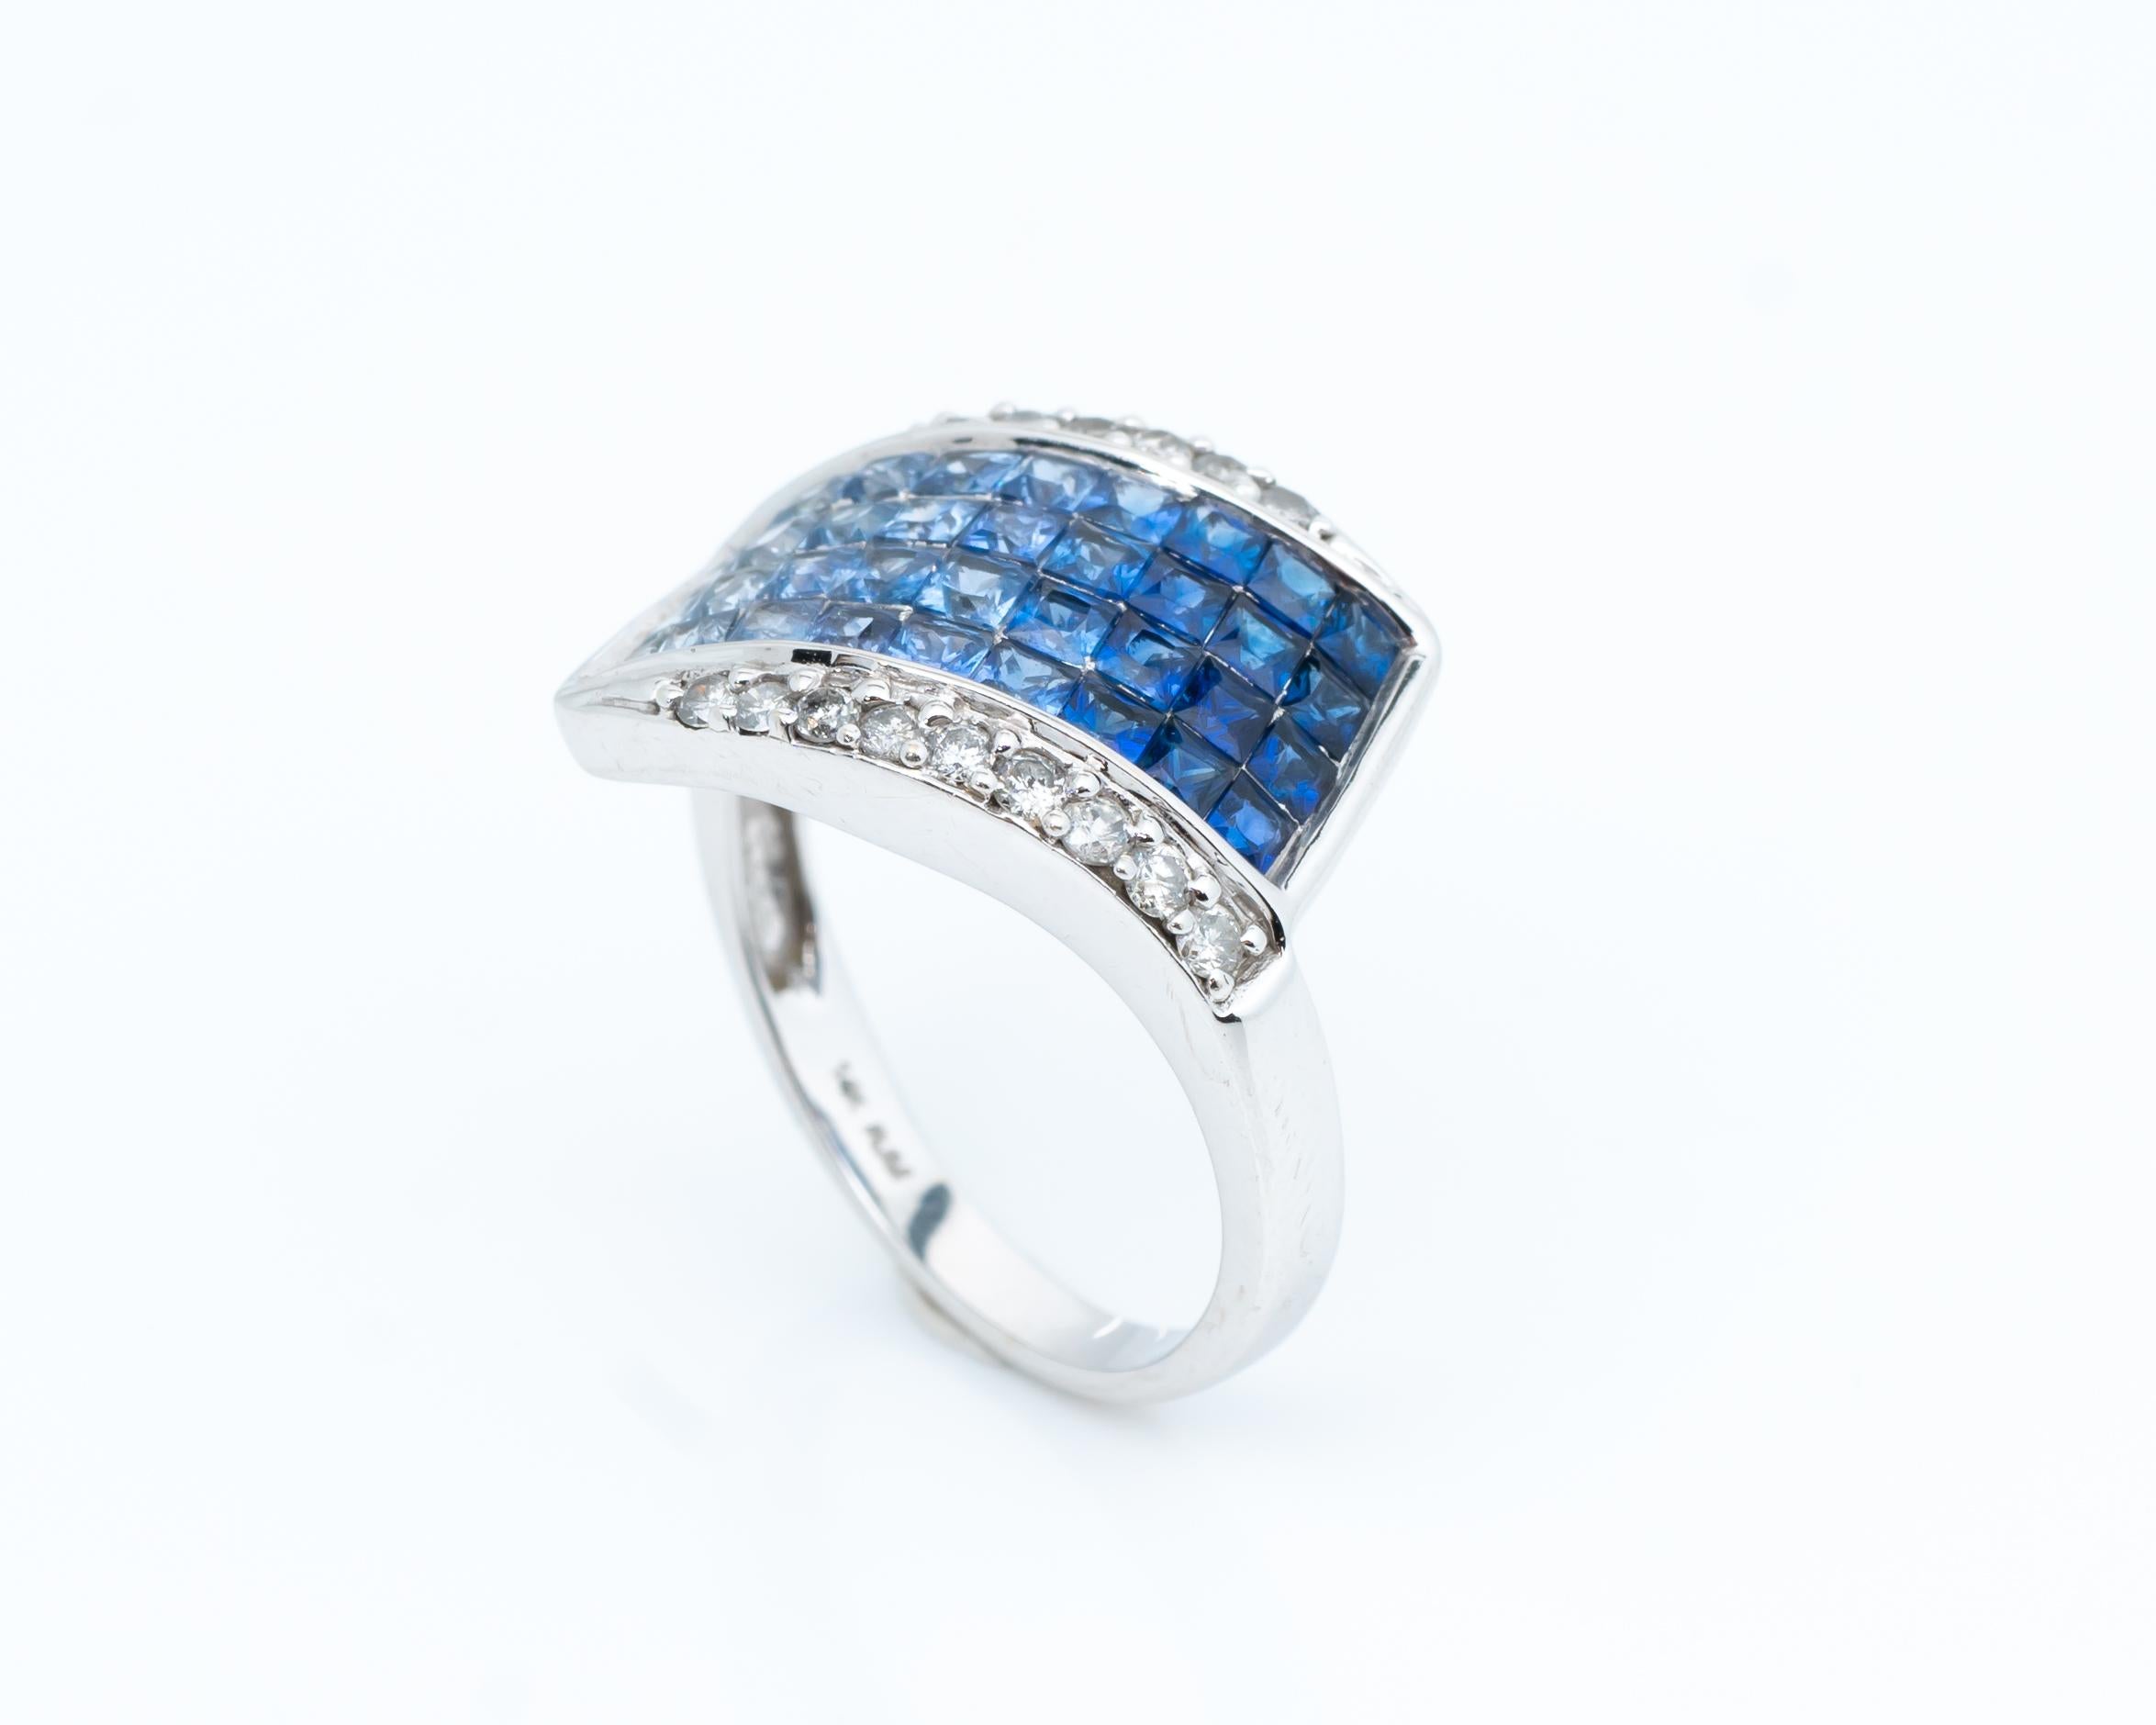 Unique 14 Karat White Gold Ring featuring Sapphires and Diamonds
Sapphires fade from light blue to dark blue, total 1 carats
Hallmarked 14K

Ring Details:
Weight: 4.92
Gold: 14 karat white gold
Size: 6

Diamond Details:
Carat: .15 carat total 
Cut: